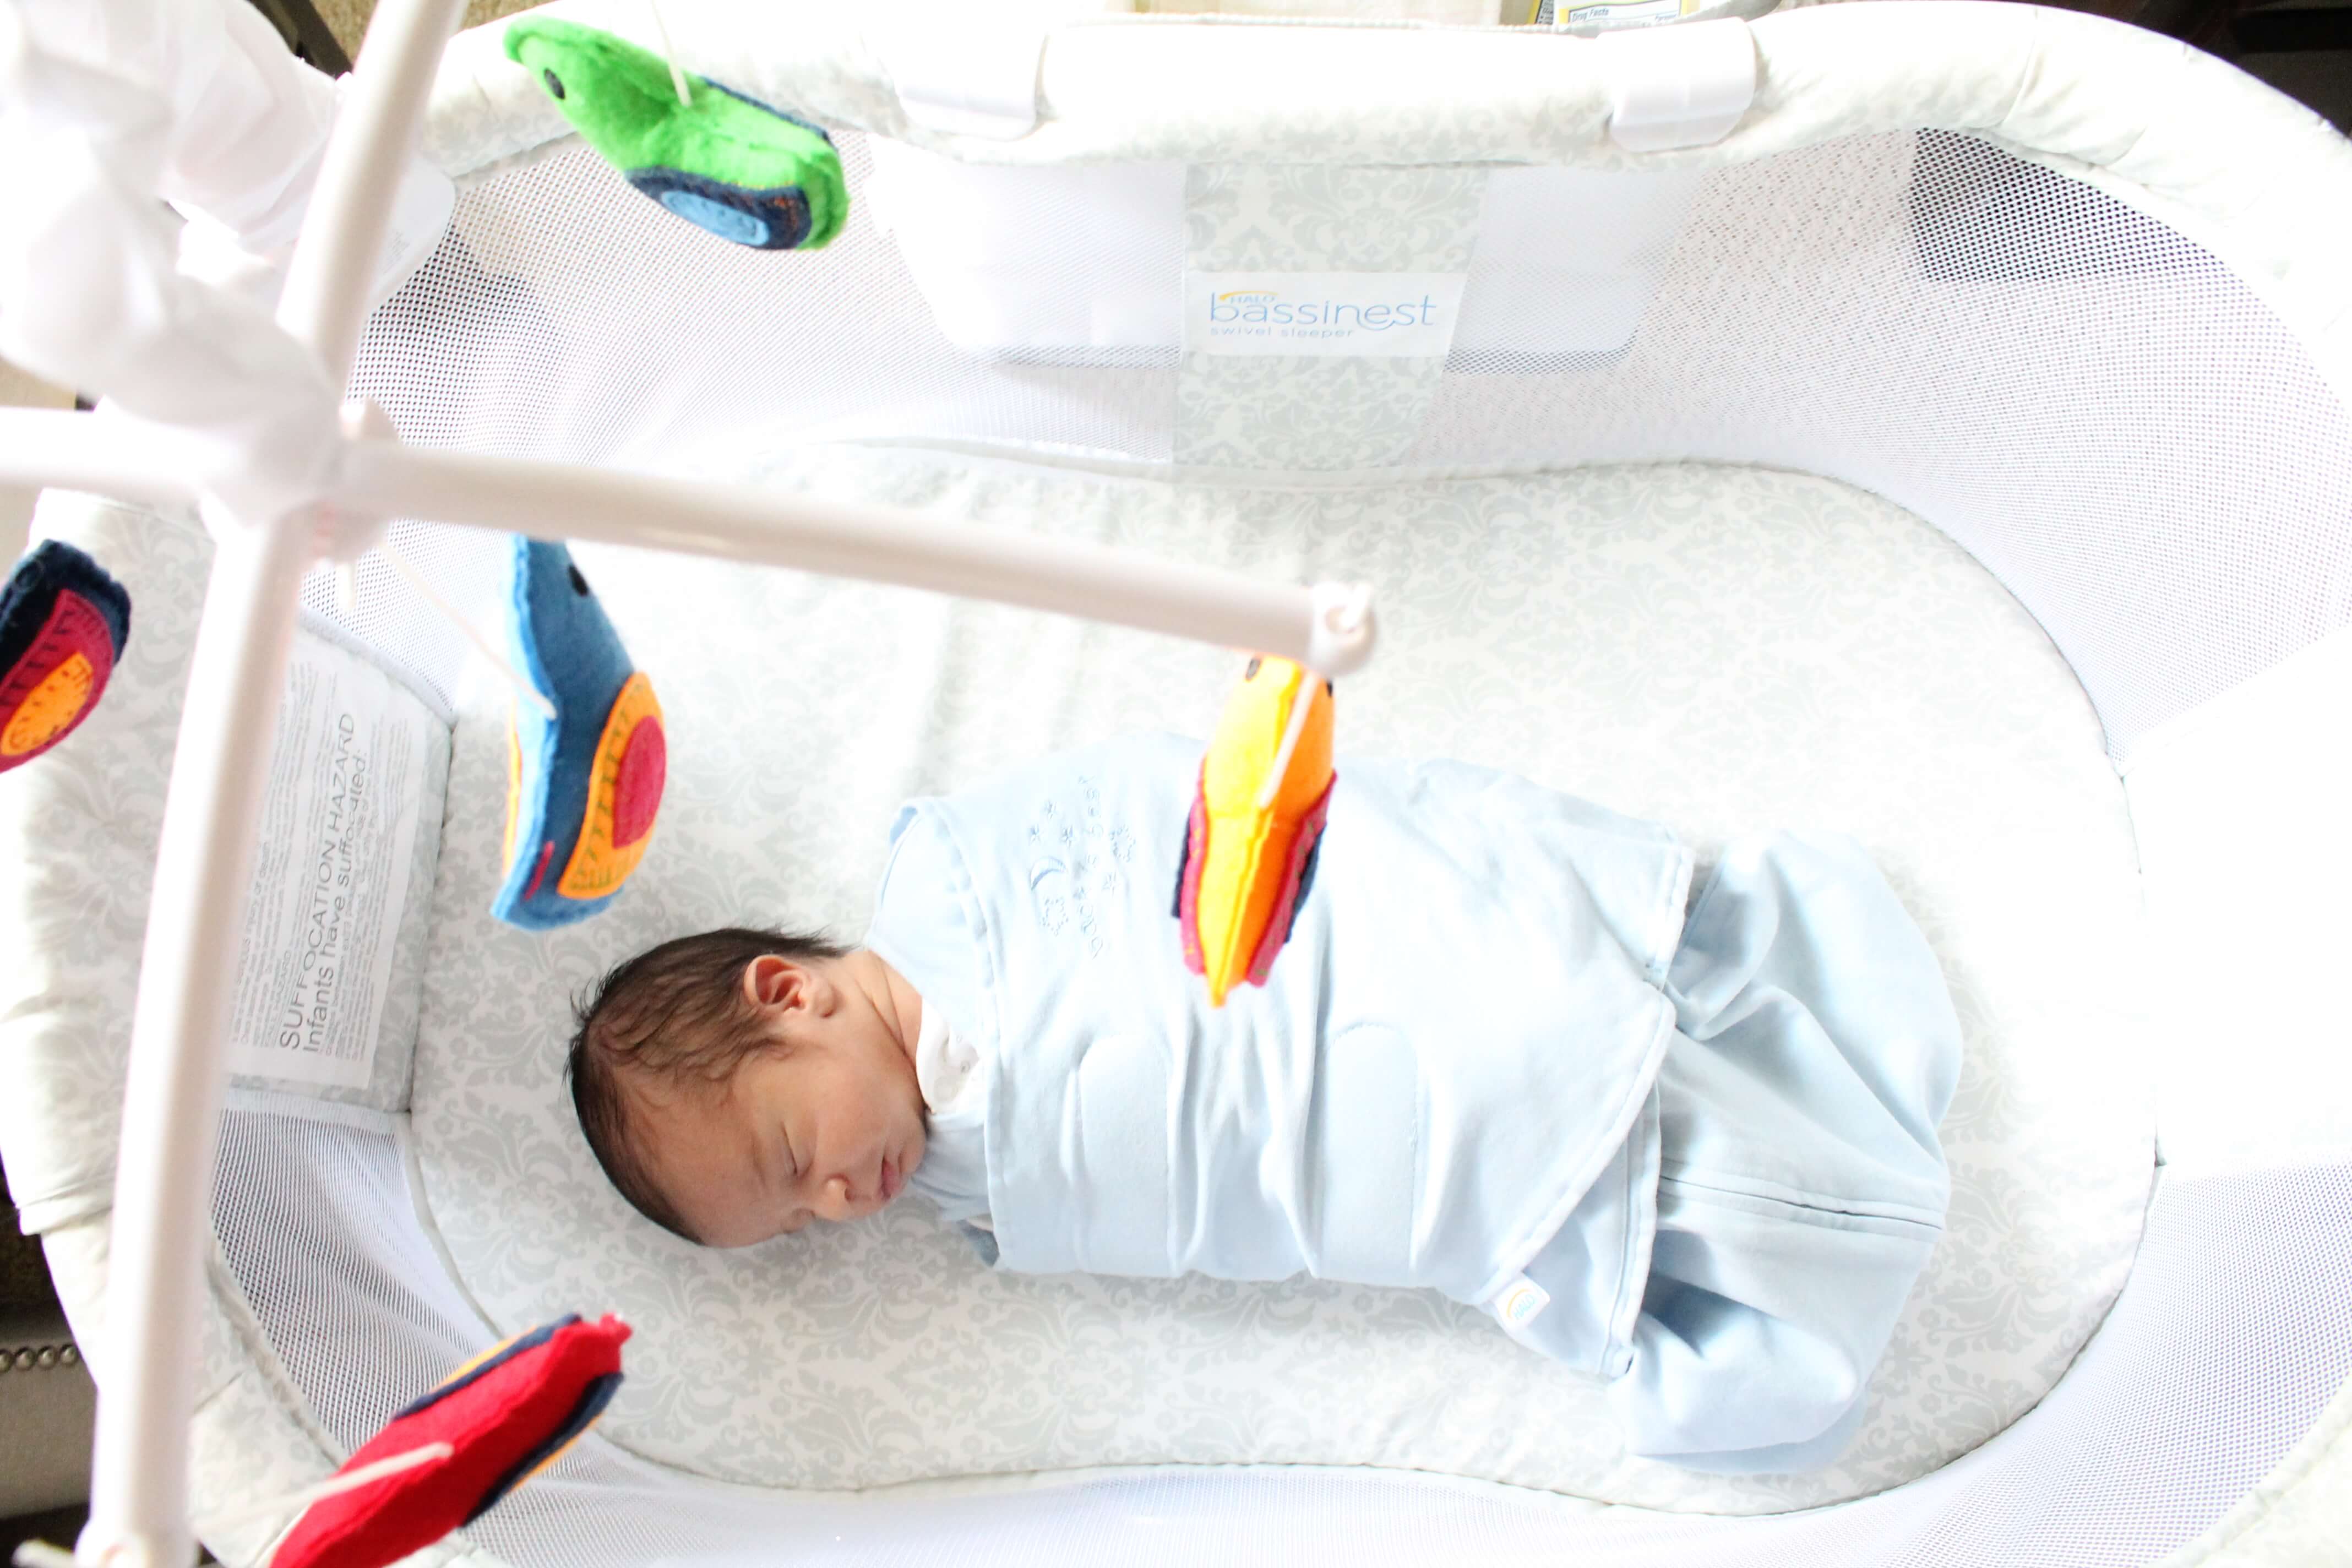 Safe Sleep Tips: From Bassinet to Crib. The best tips for keeping your baby safe and sound while sleeping.